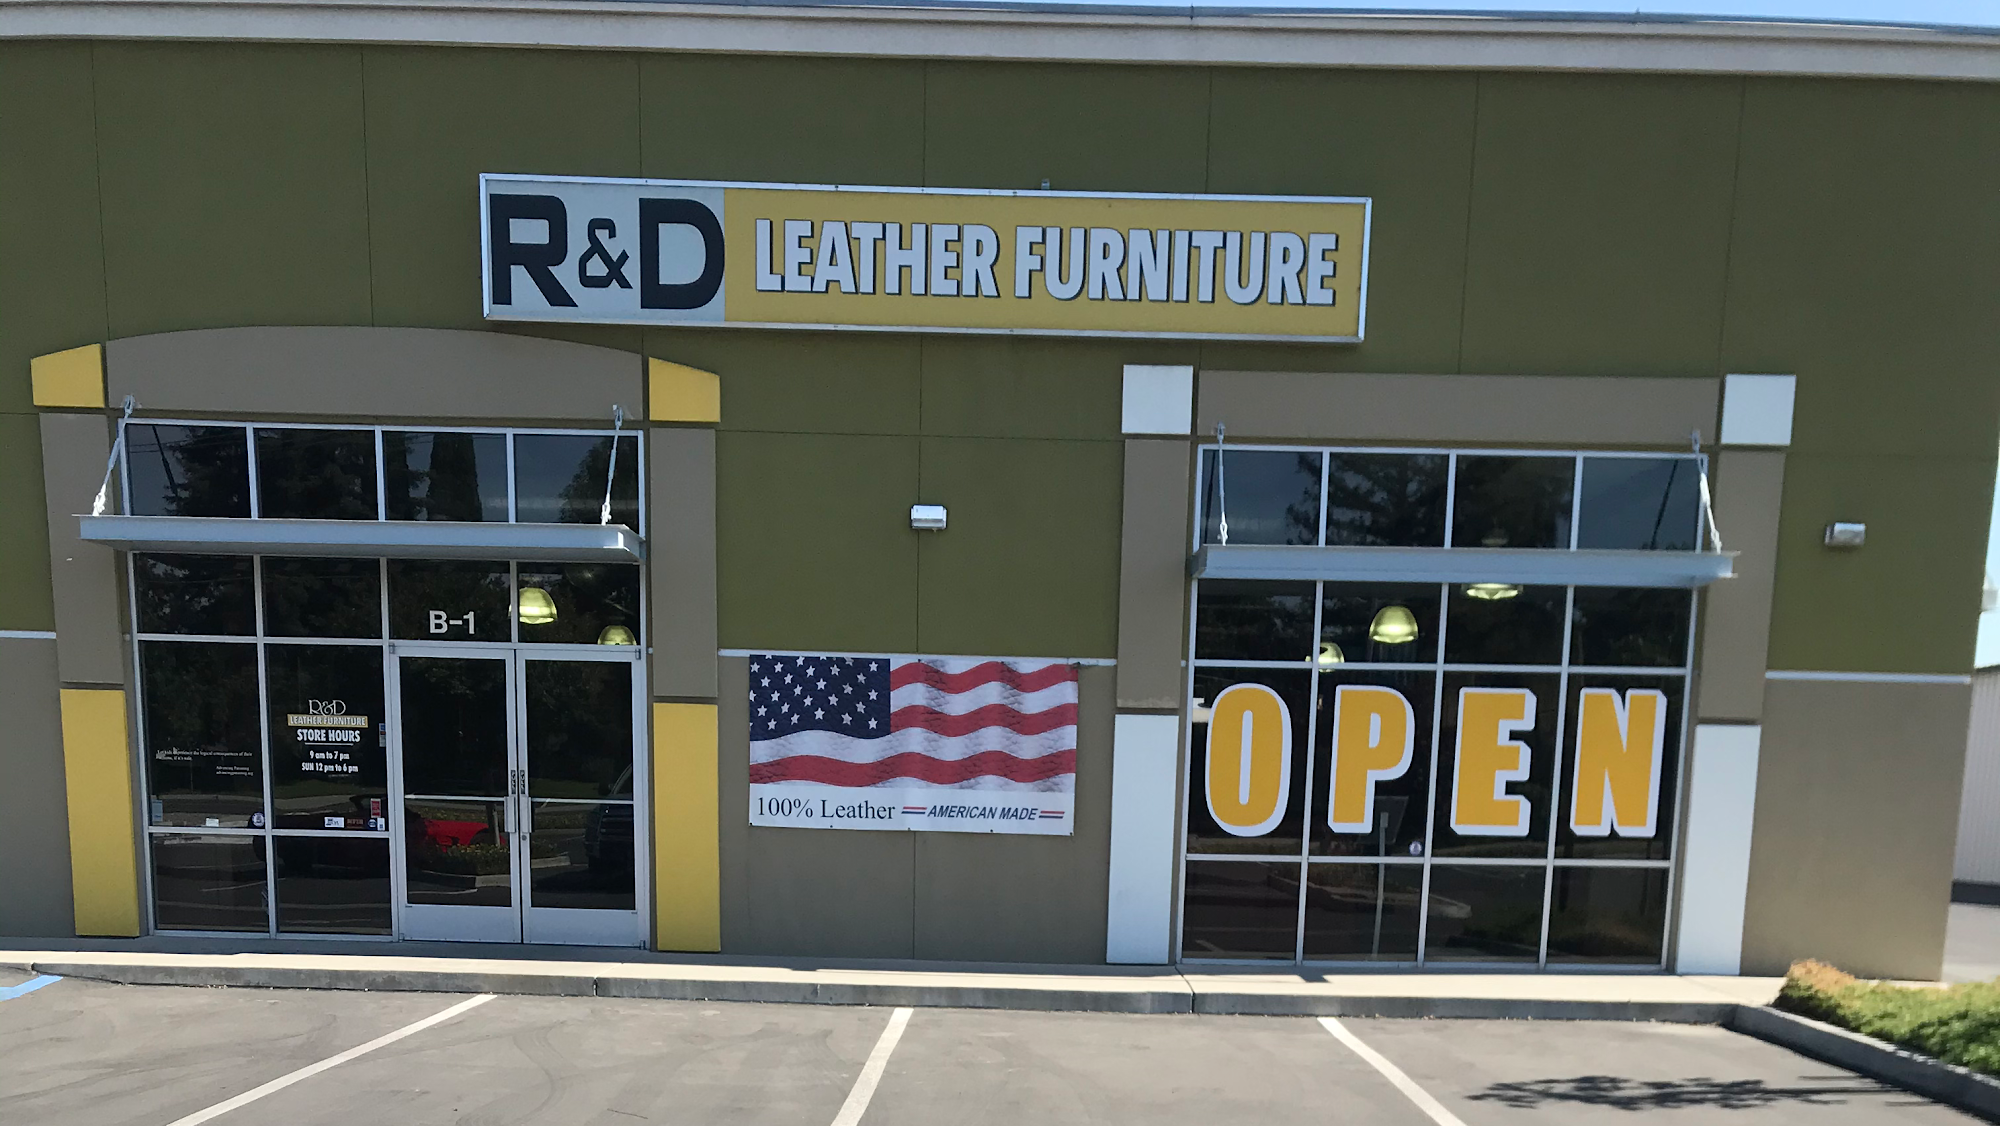 R & D Leather Furniture